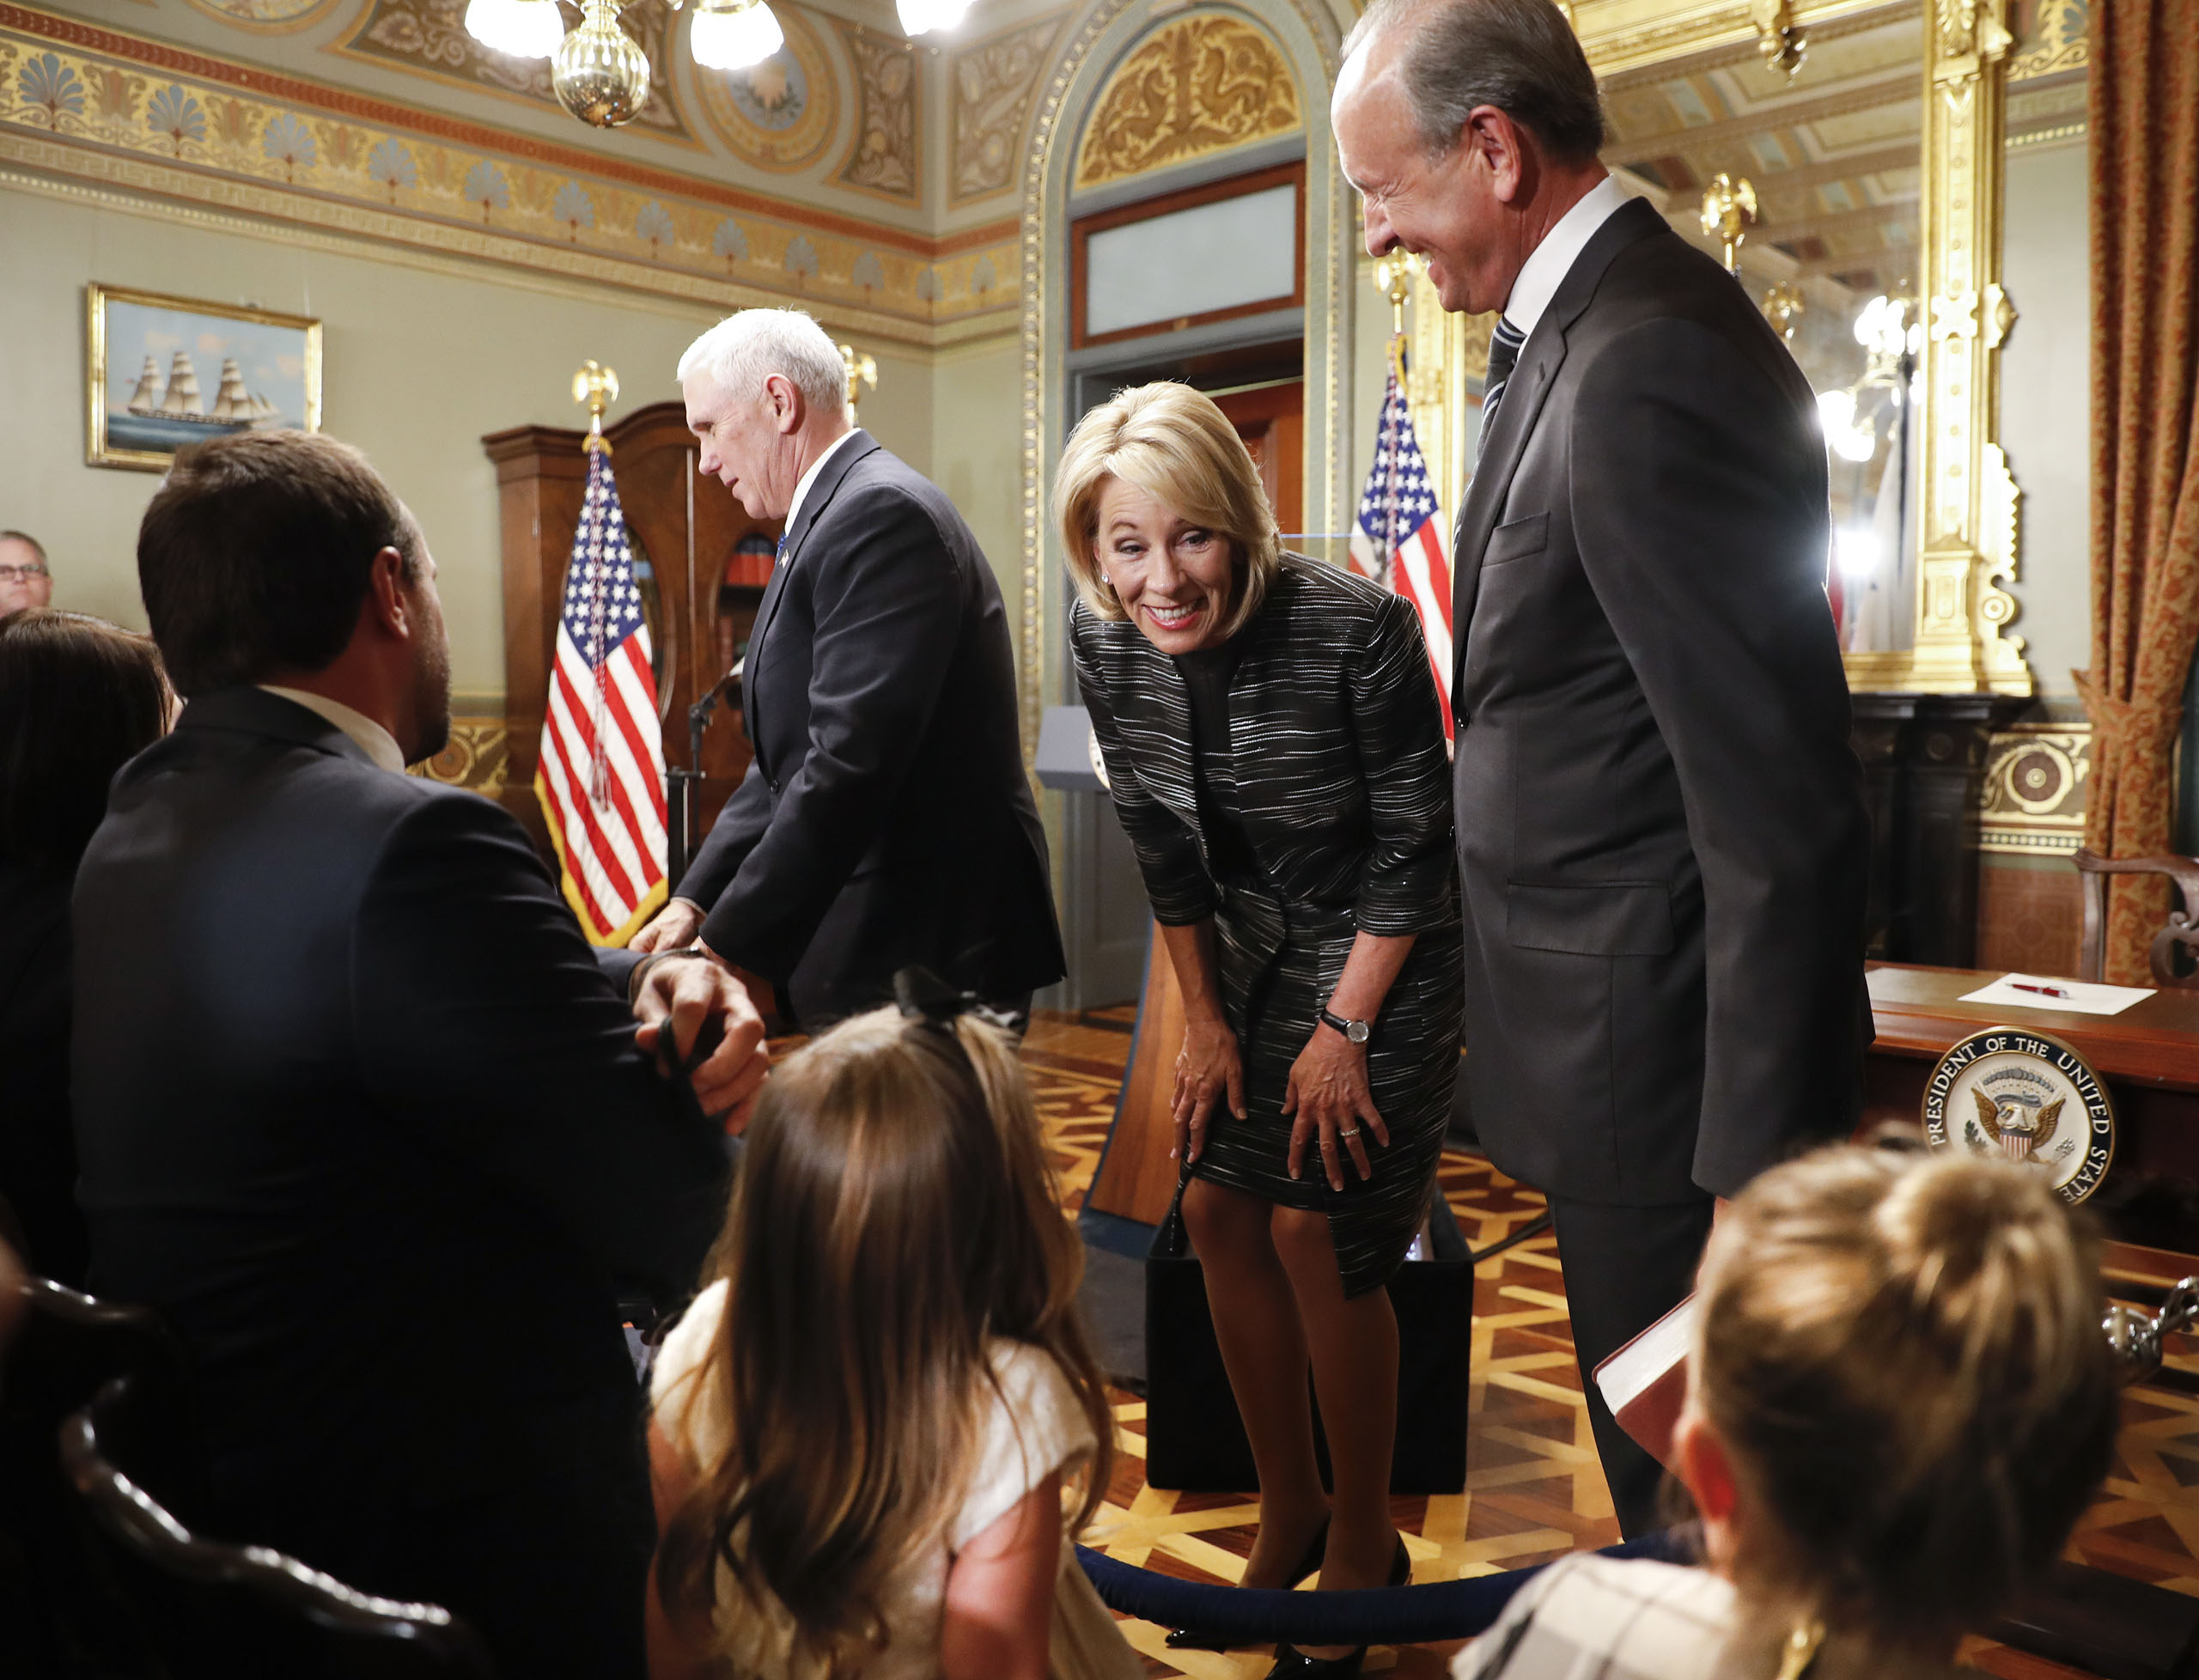 Education Secretary Betsy DeVos, center, leans down to greet children and other guests following her swearing in ceremony administered by Vice President Mike Pence, left, in the Eisenhower Executive Office Building in the White House, on Feb. 7, 2017.